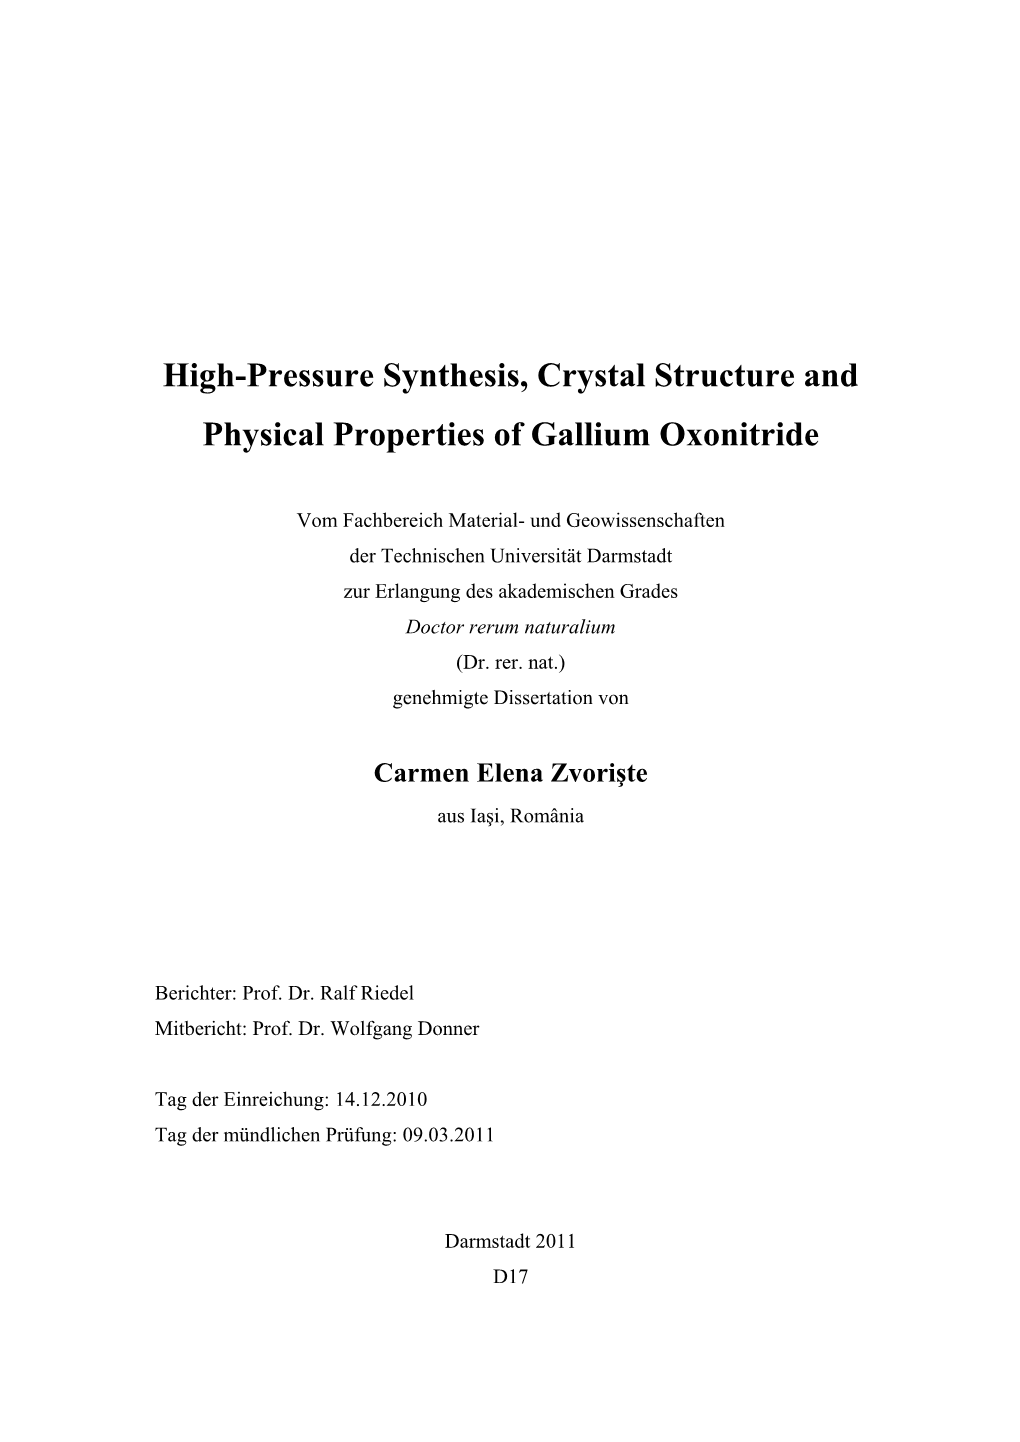 High-Pressure Synthesis, Crystal Structure and Physical Properties of Gallium Oxonitride